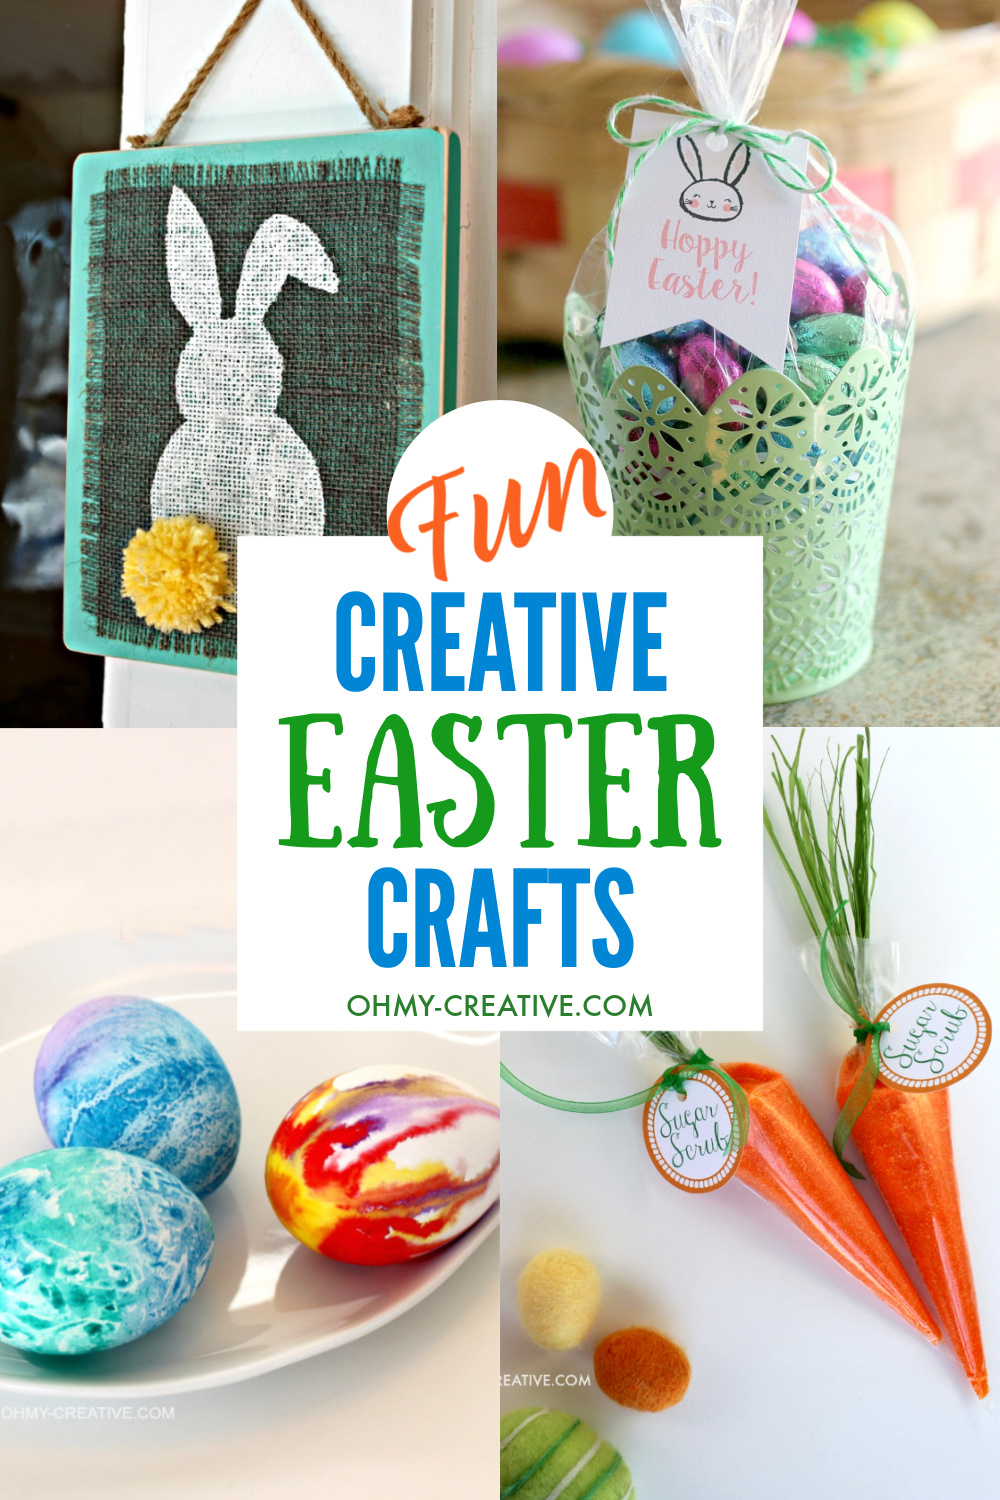 A collage of fun creative Easter ideas including Easter crafts!